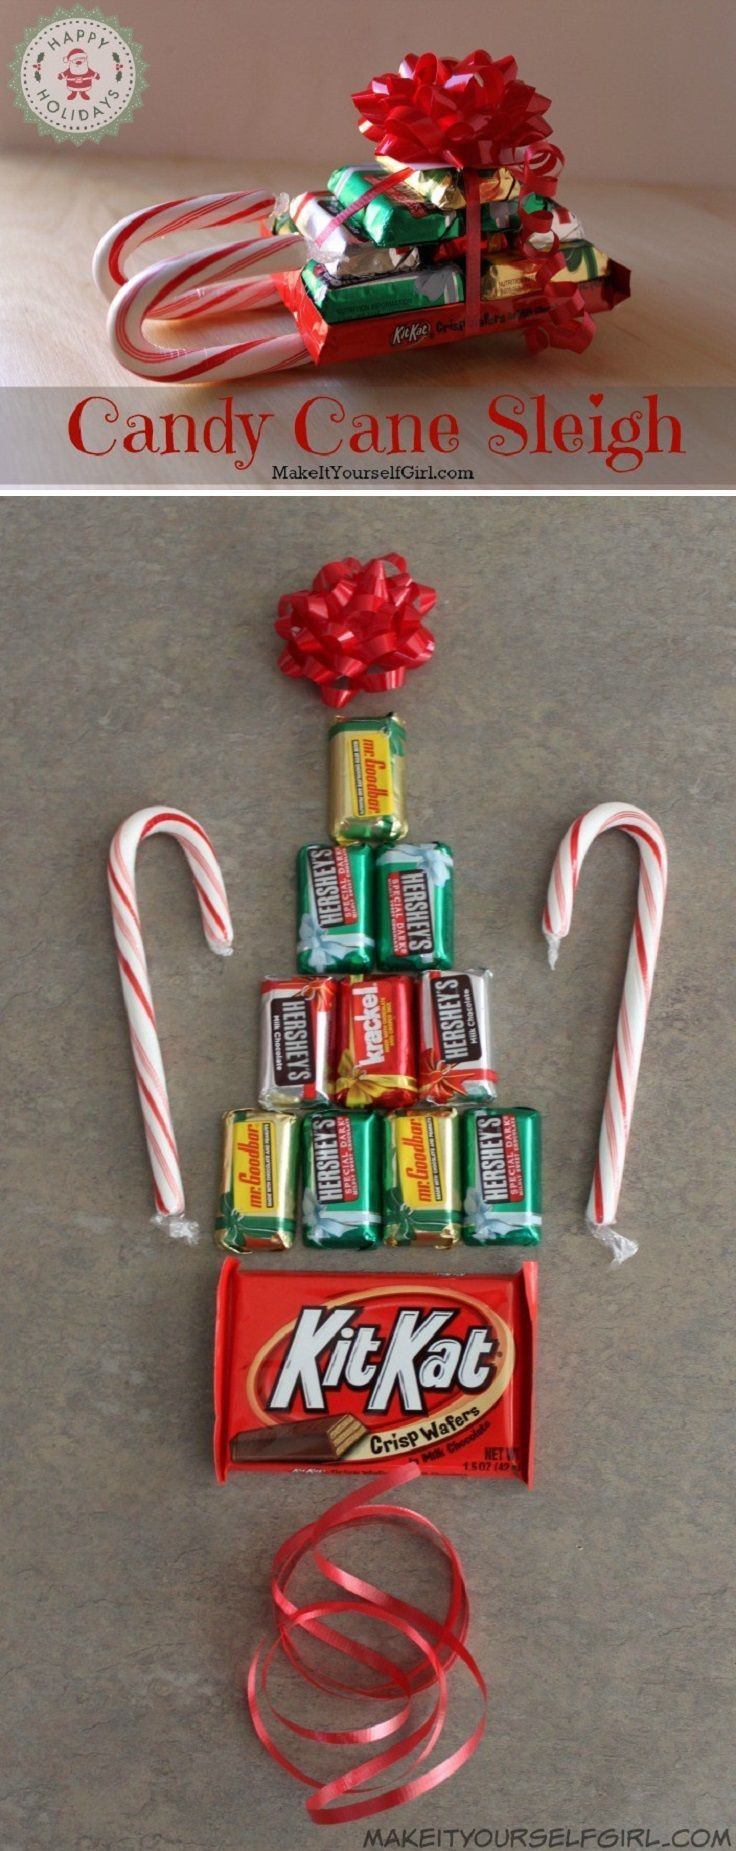 Candy Cane Crafts For Christmas
 Best 25 Christmas party favors ideas on Pinterest